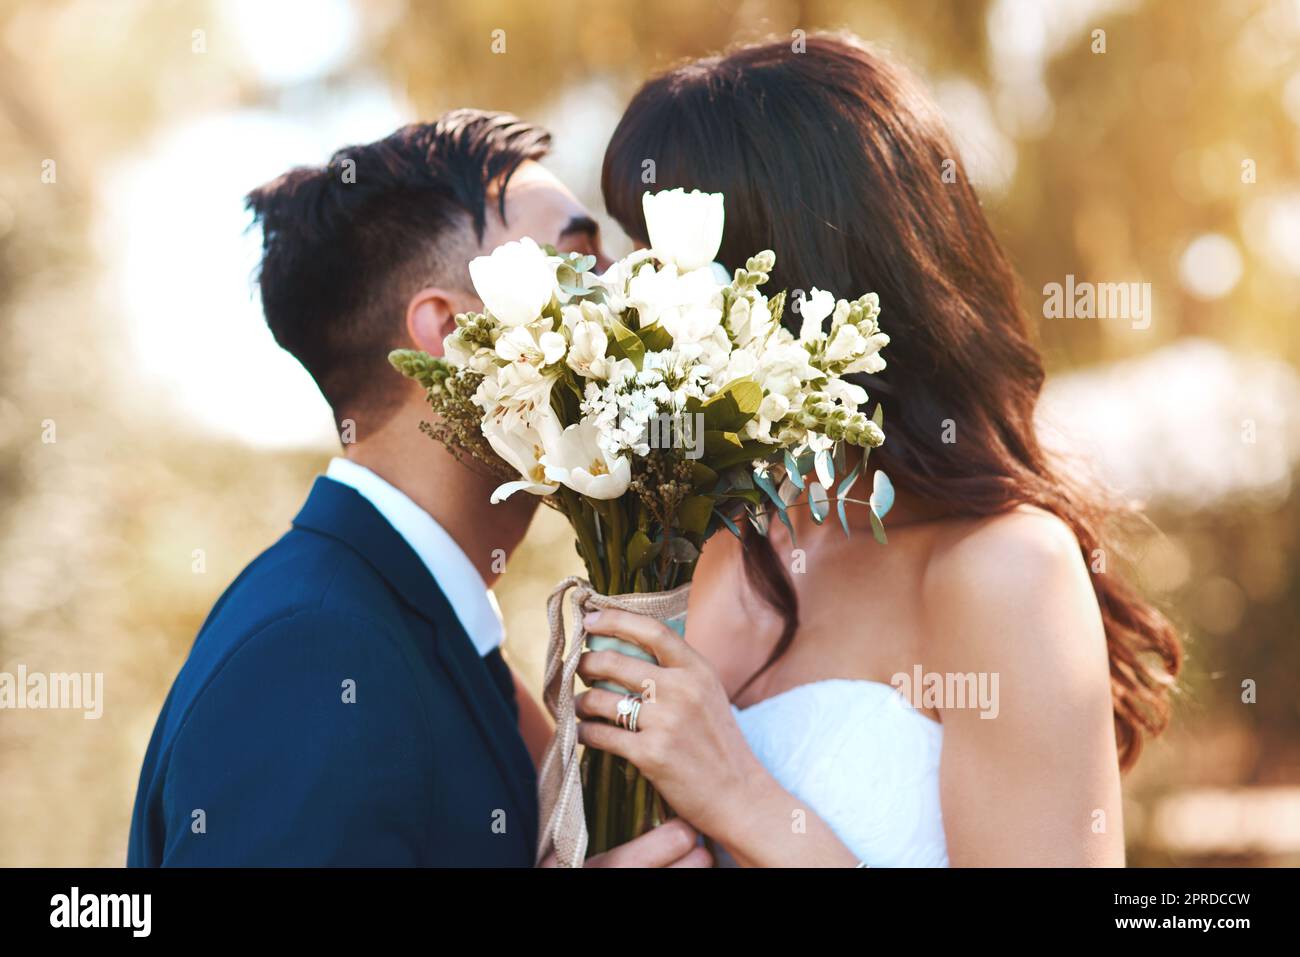 Were ready for that honeymoon now. a bride and groom covering their faces with a bouquet while kissing. Stock Photo